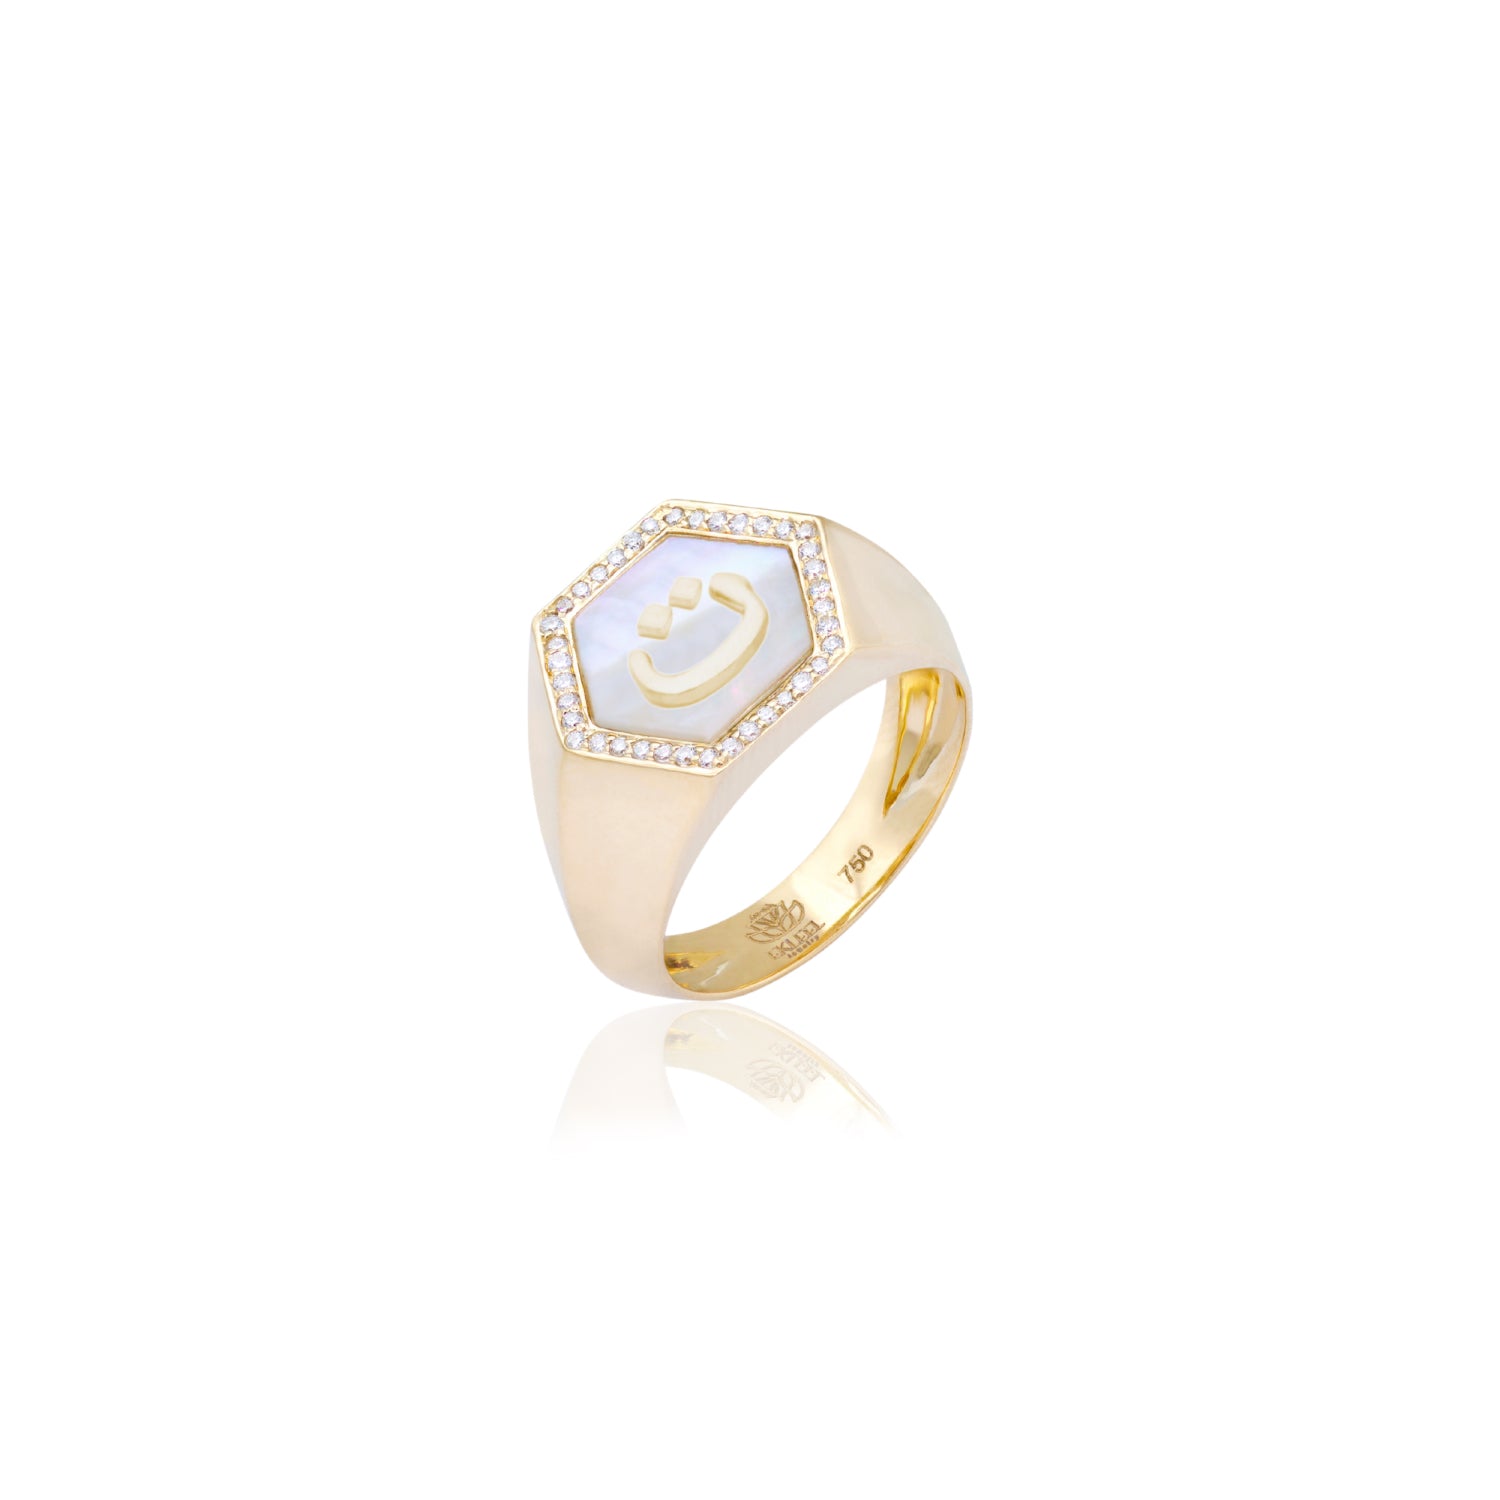 Qamoos 2.0 Letter ت White Mother of Pearl and Diamond Signet Ring in Yellow Gold